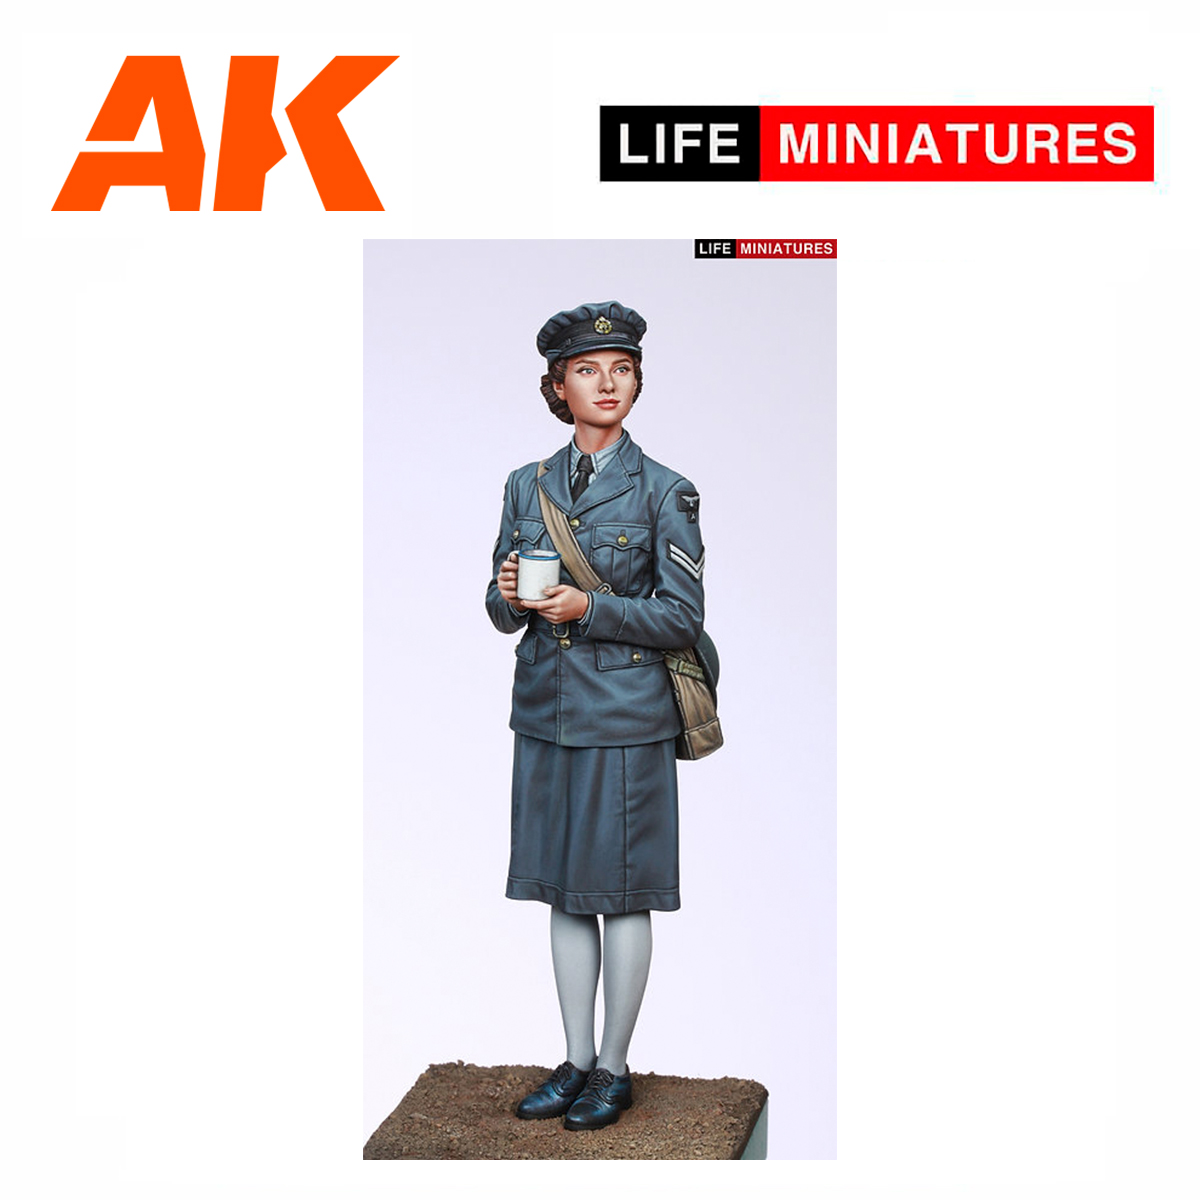 Life Miniatures – WAAF Assistant Section Leader 1940-1941 1/16